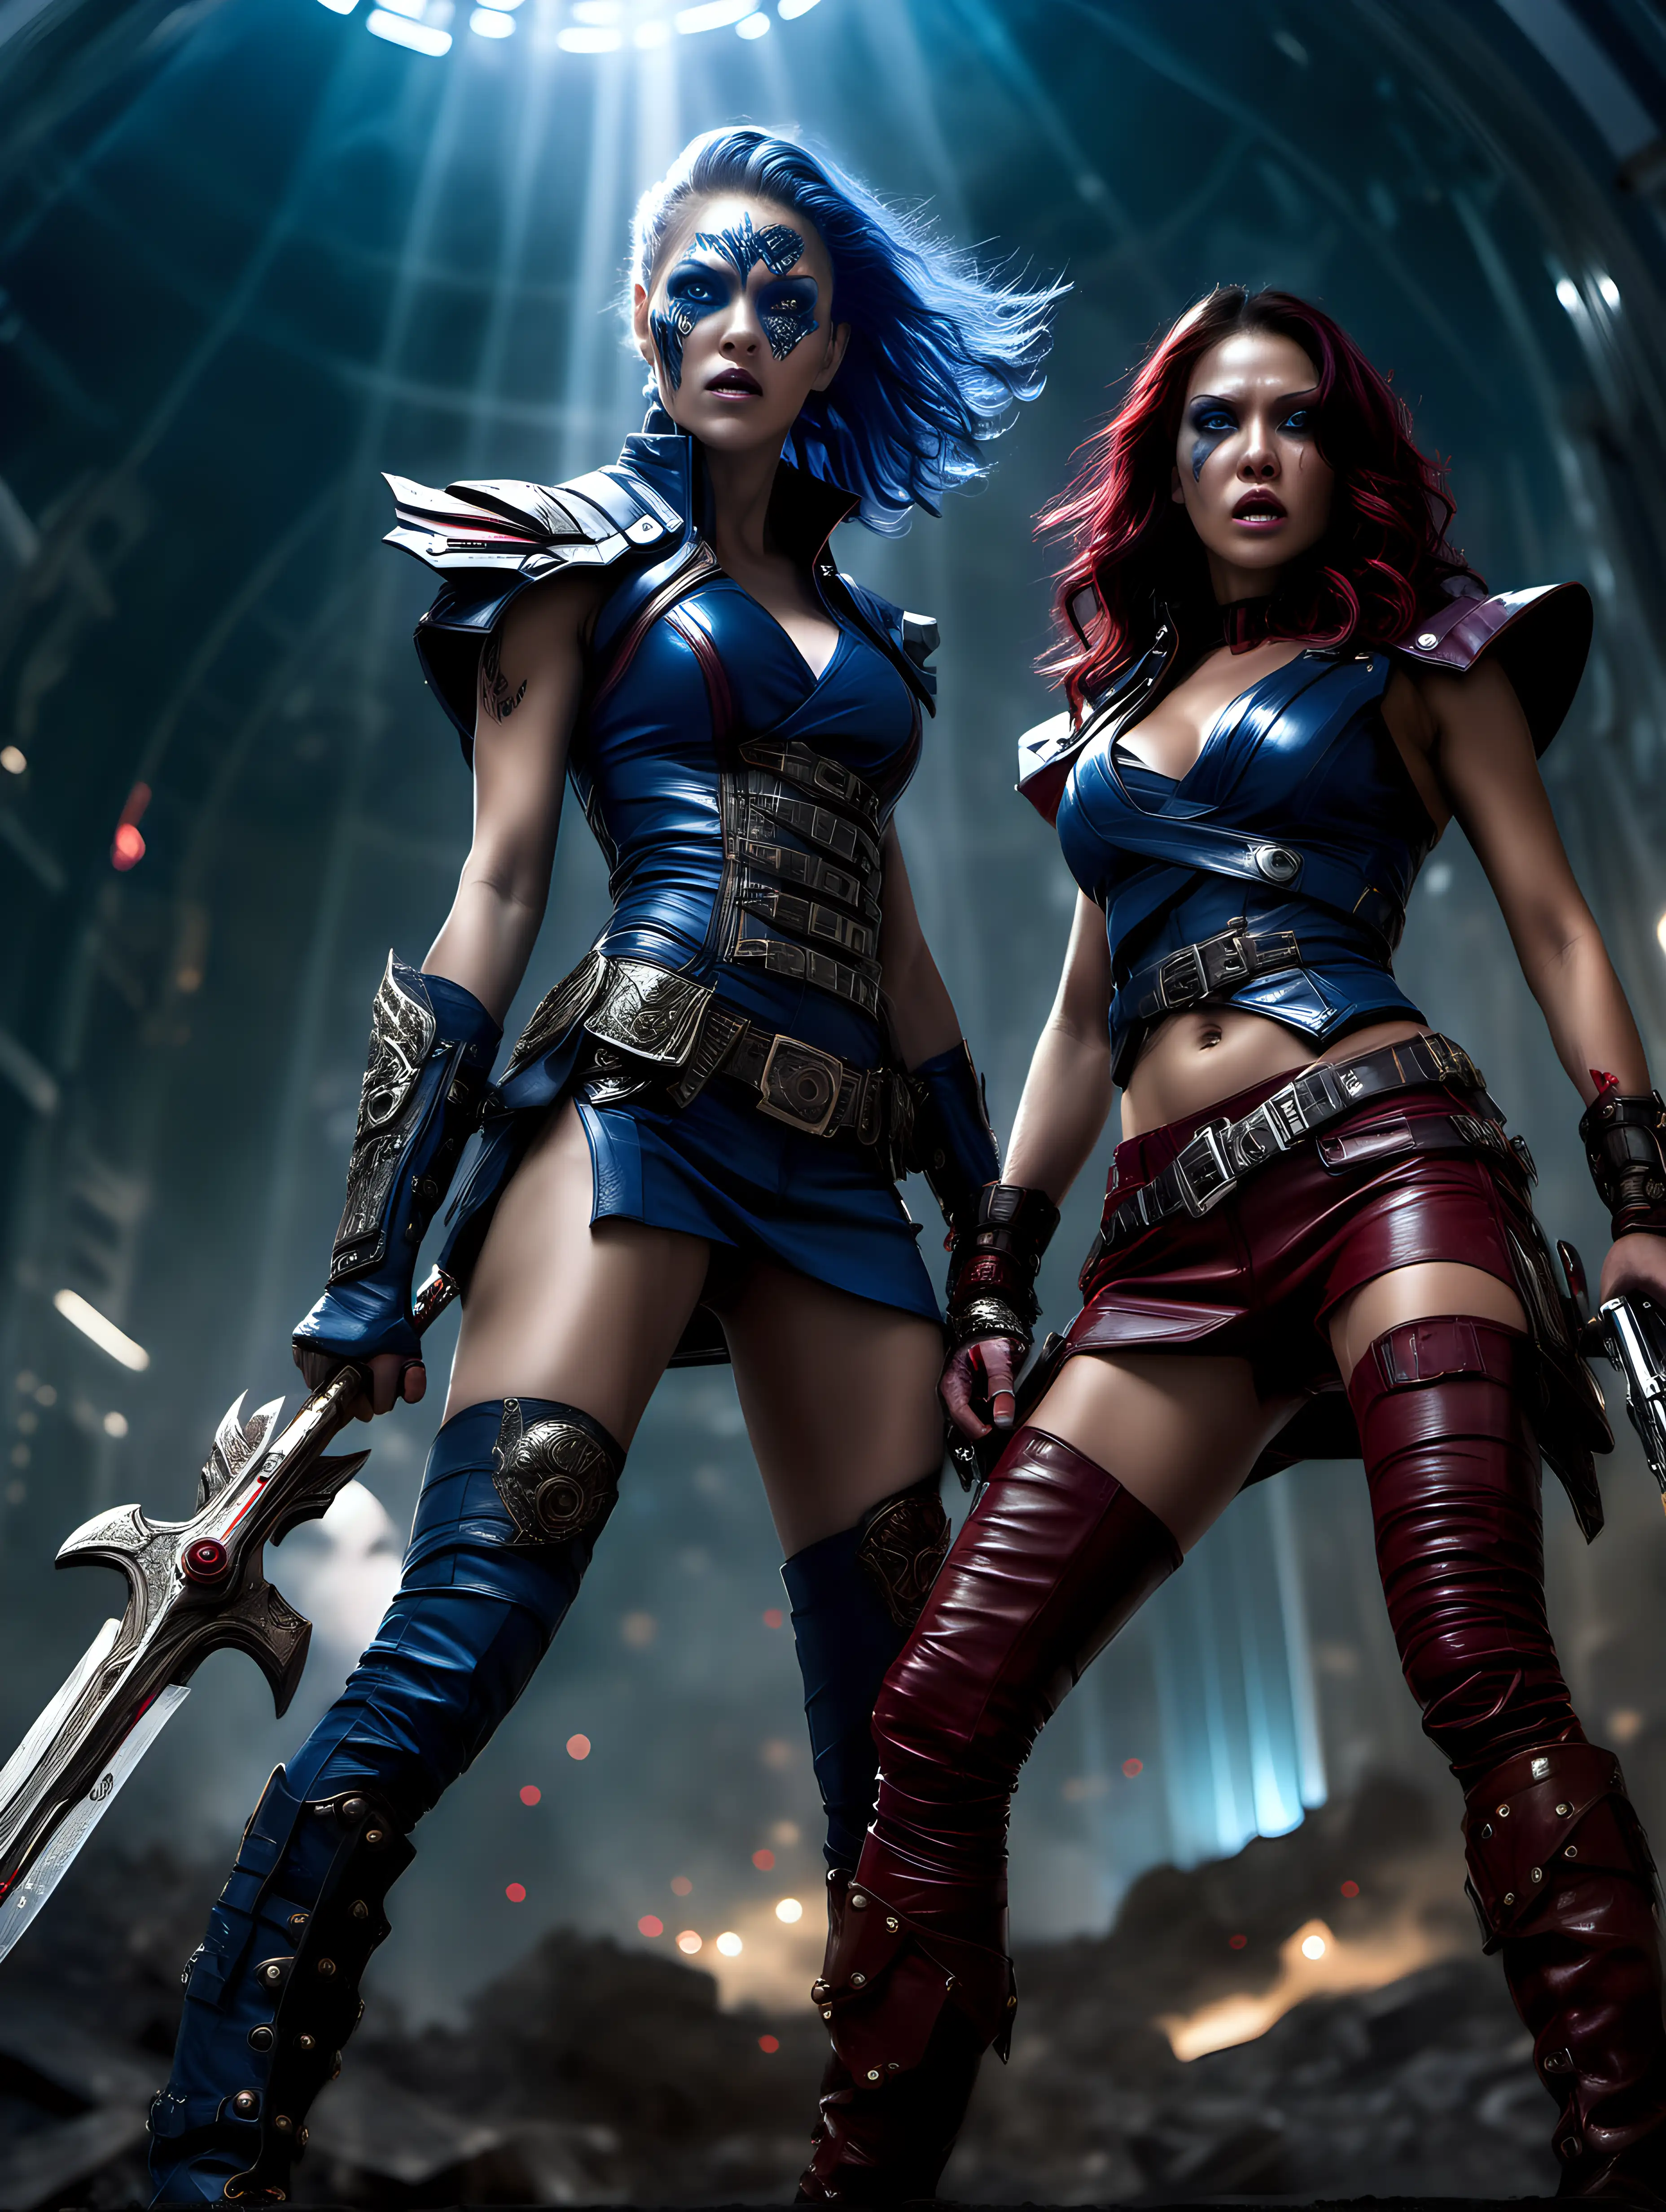 Epic Battle Cinematic Duel of Warrior Women in Guardians of the Galaxy Universe